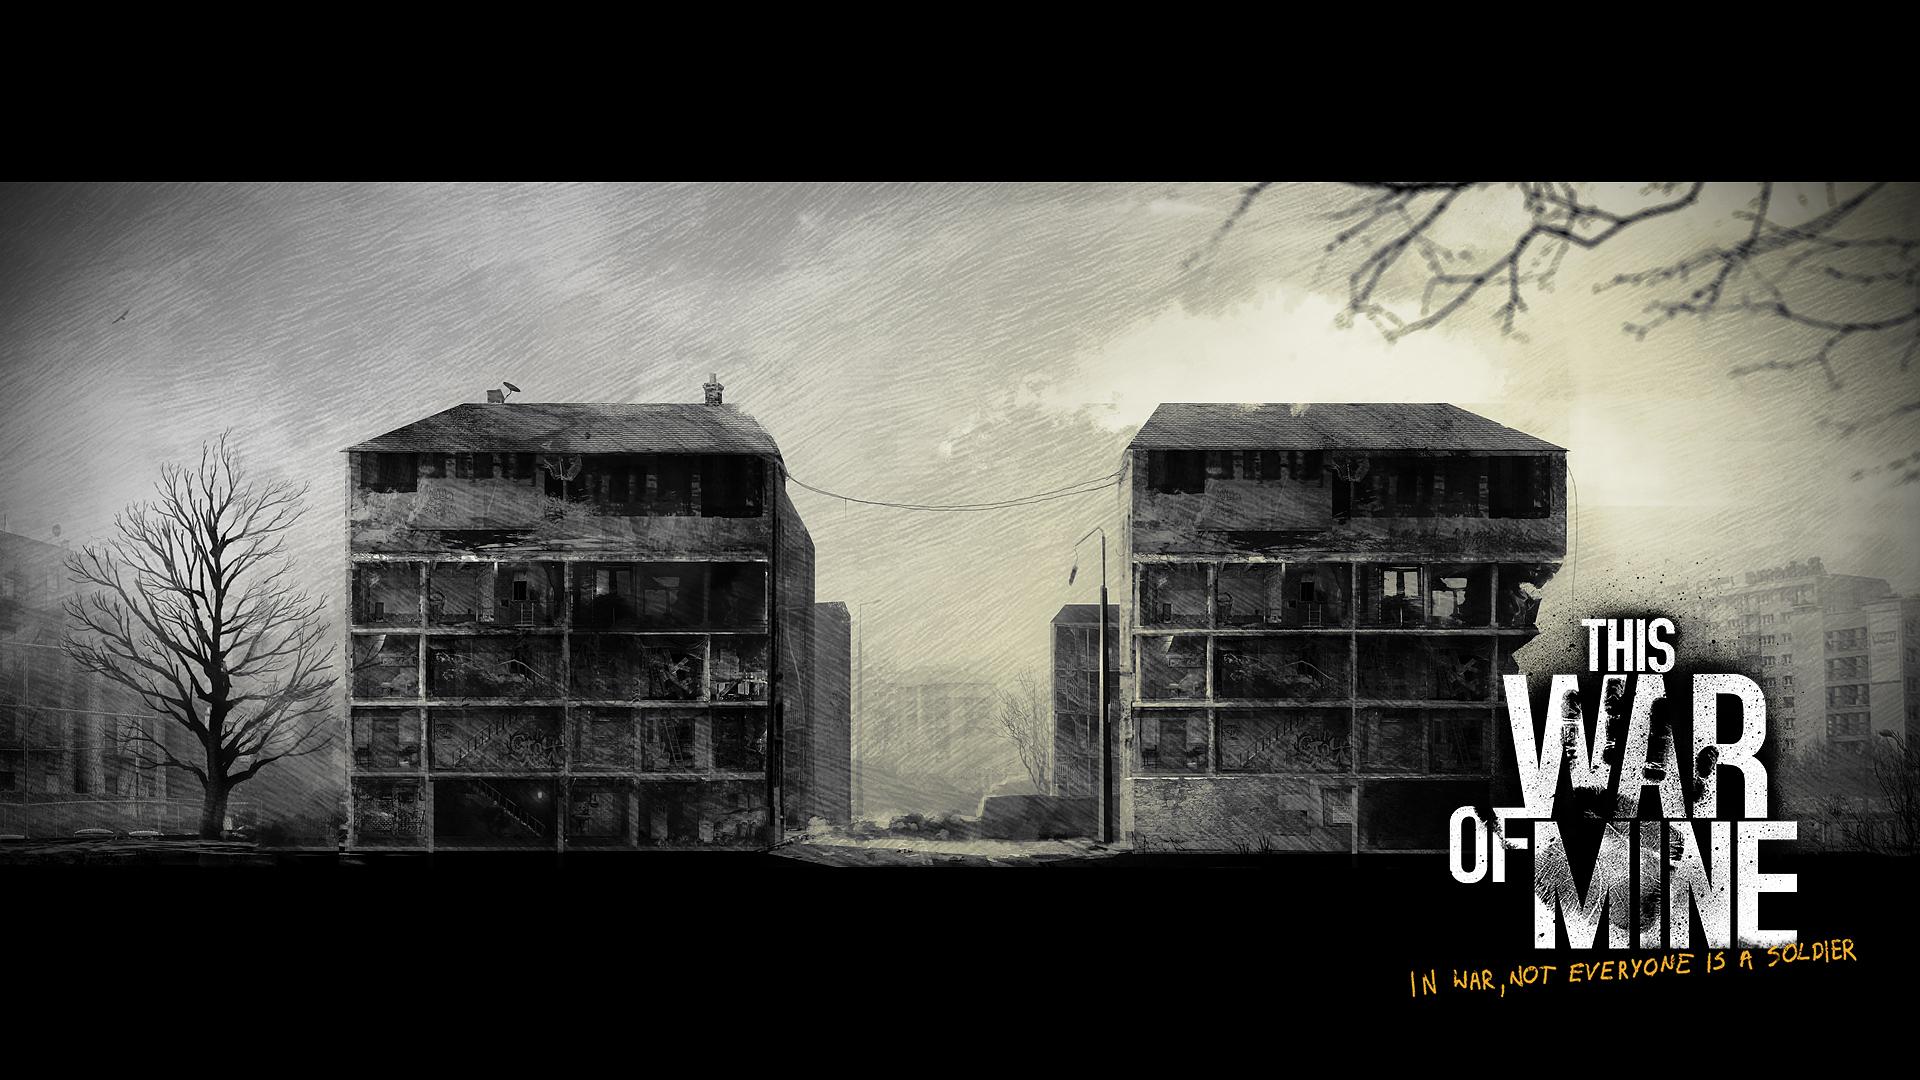 This War of Mine (2015) promotional art